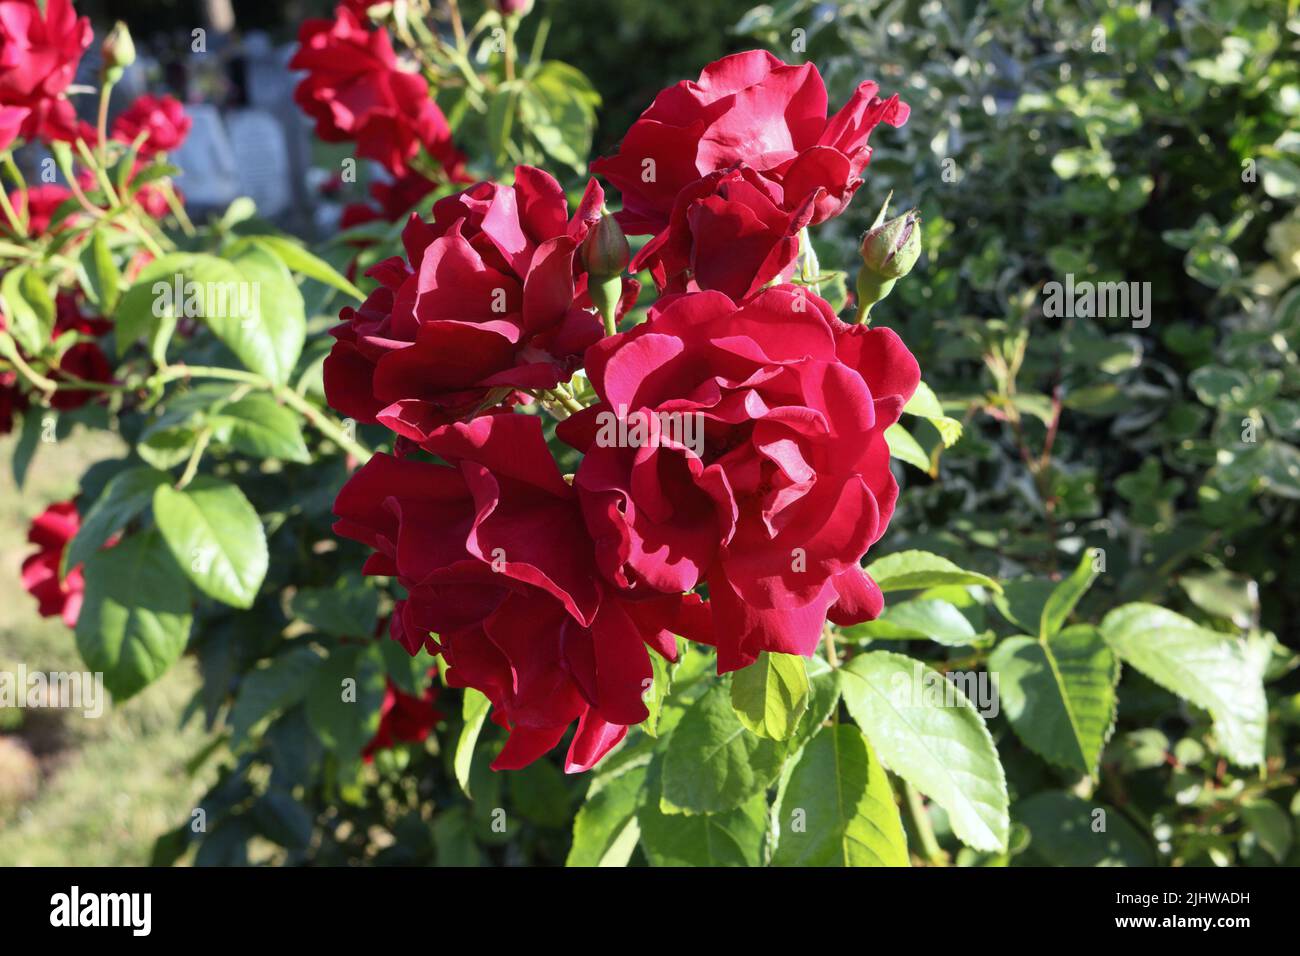 Red roses bush in bloom, growing wild in cemetery Stock Photo